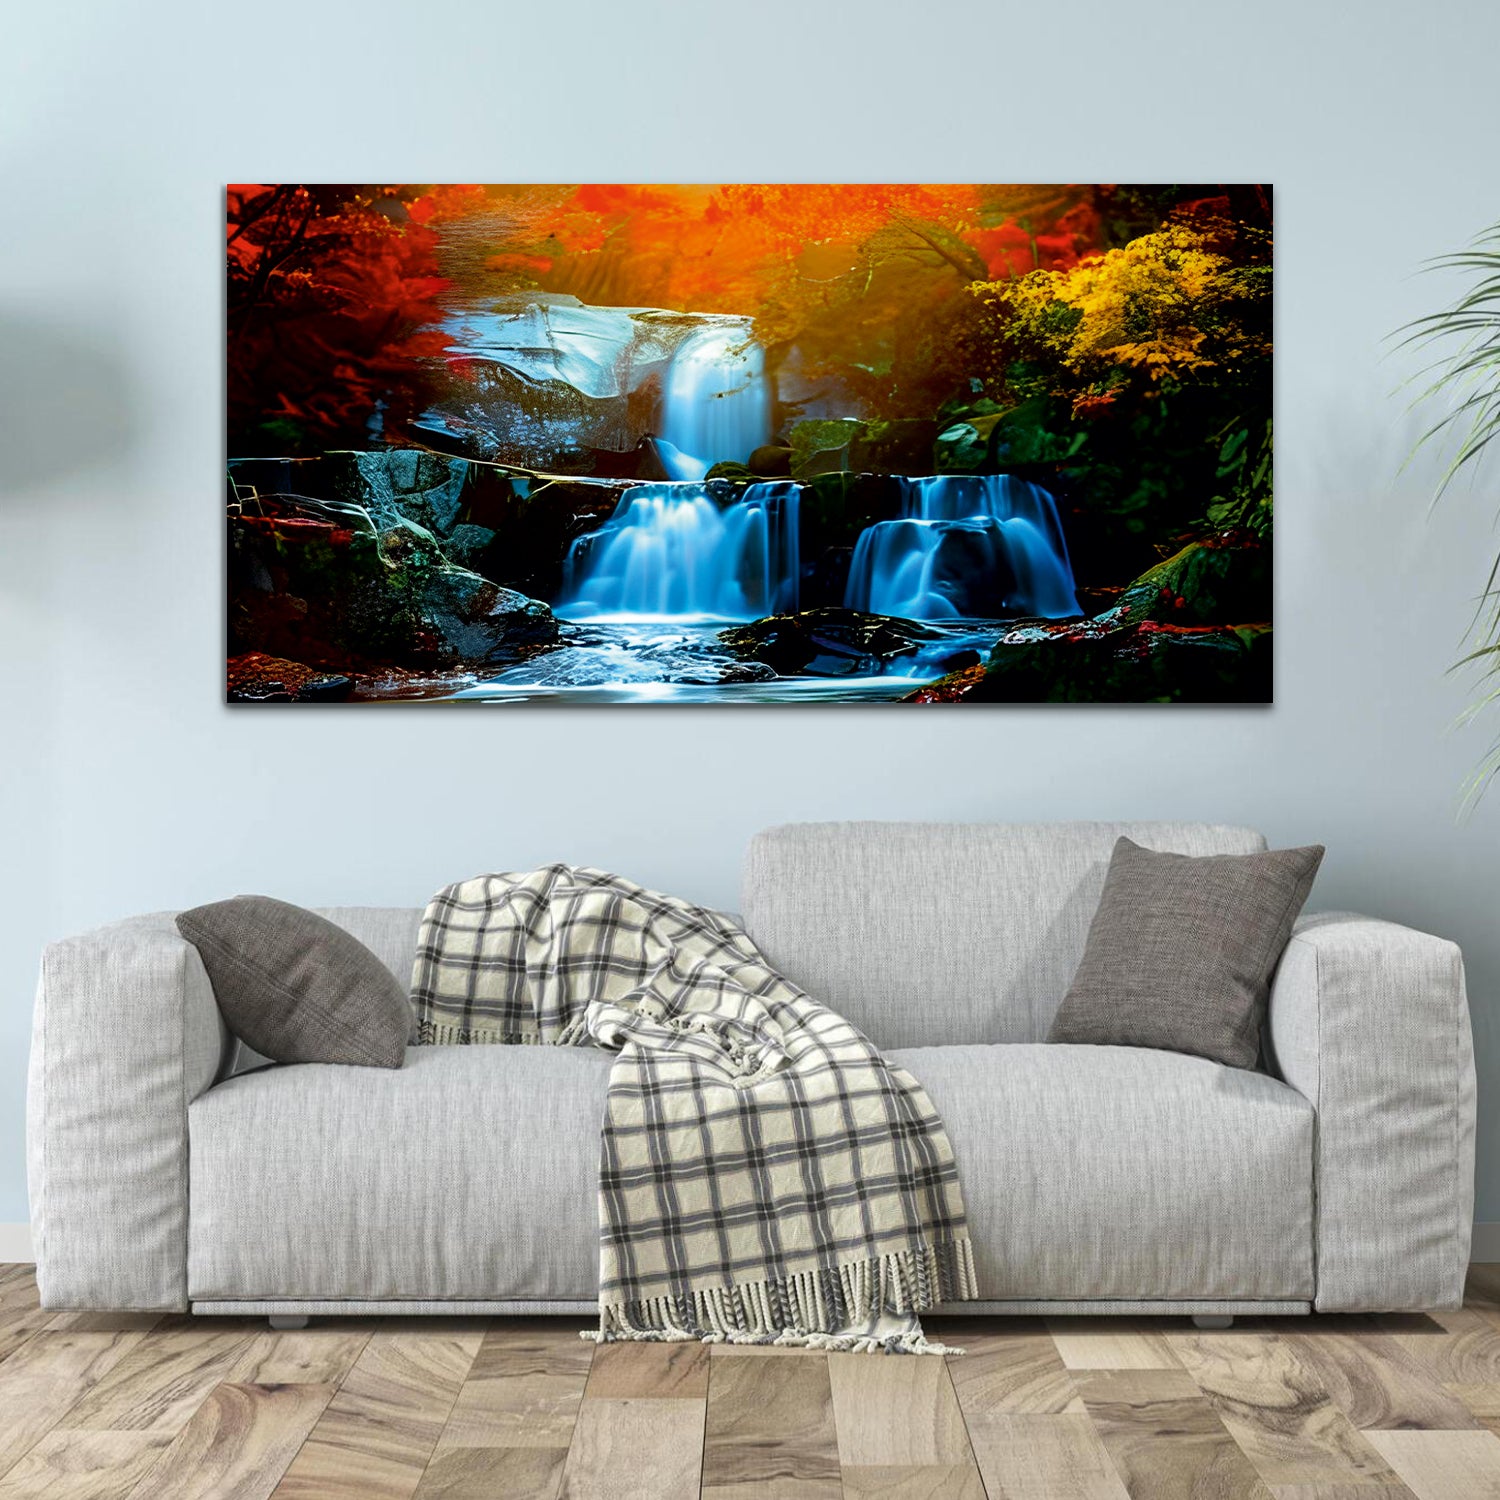 Autumn leaves and waterfall living bed room Canvas Wall Painting